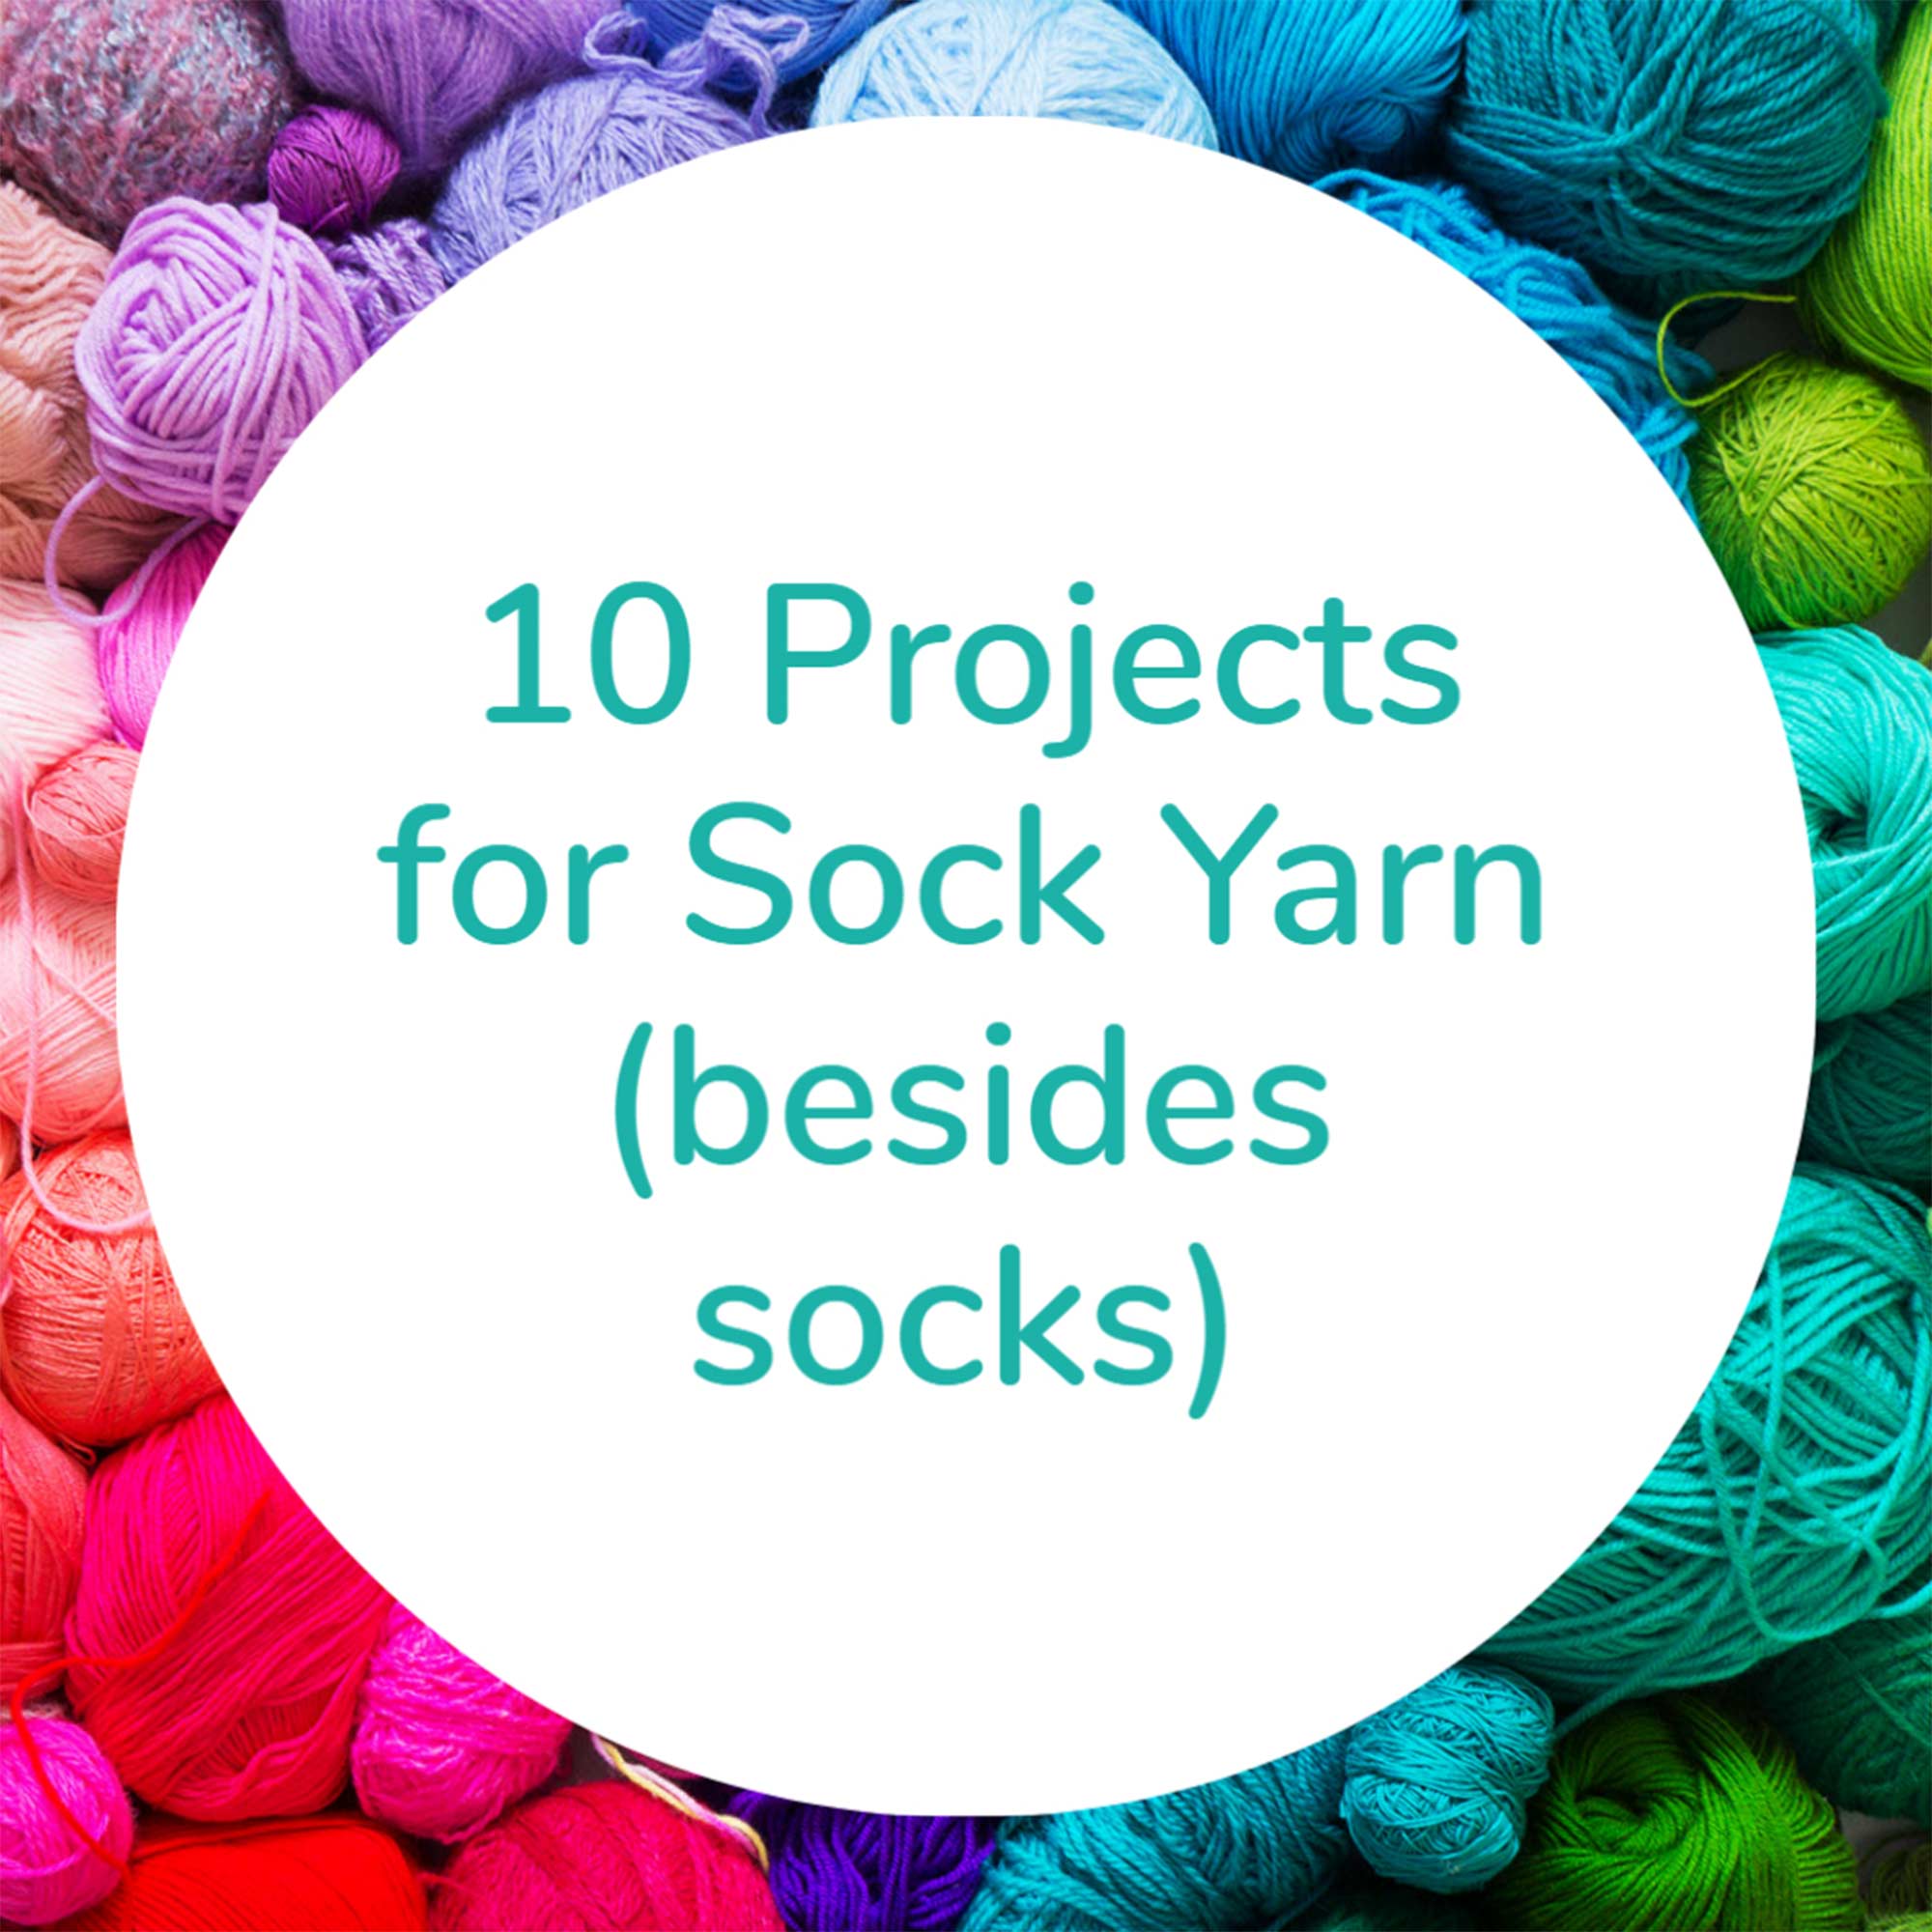 what to make with sock yarn besides socks - fingering weight patterns for knitting and crochet